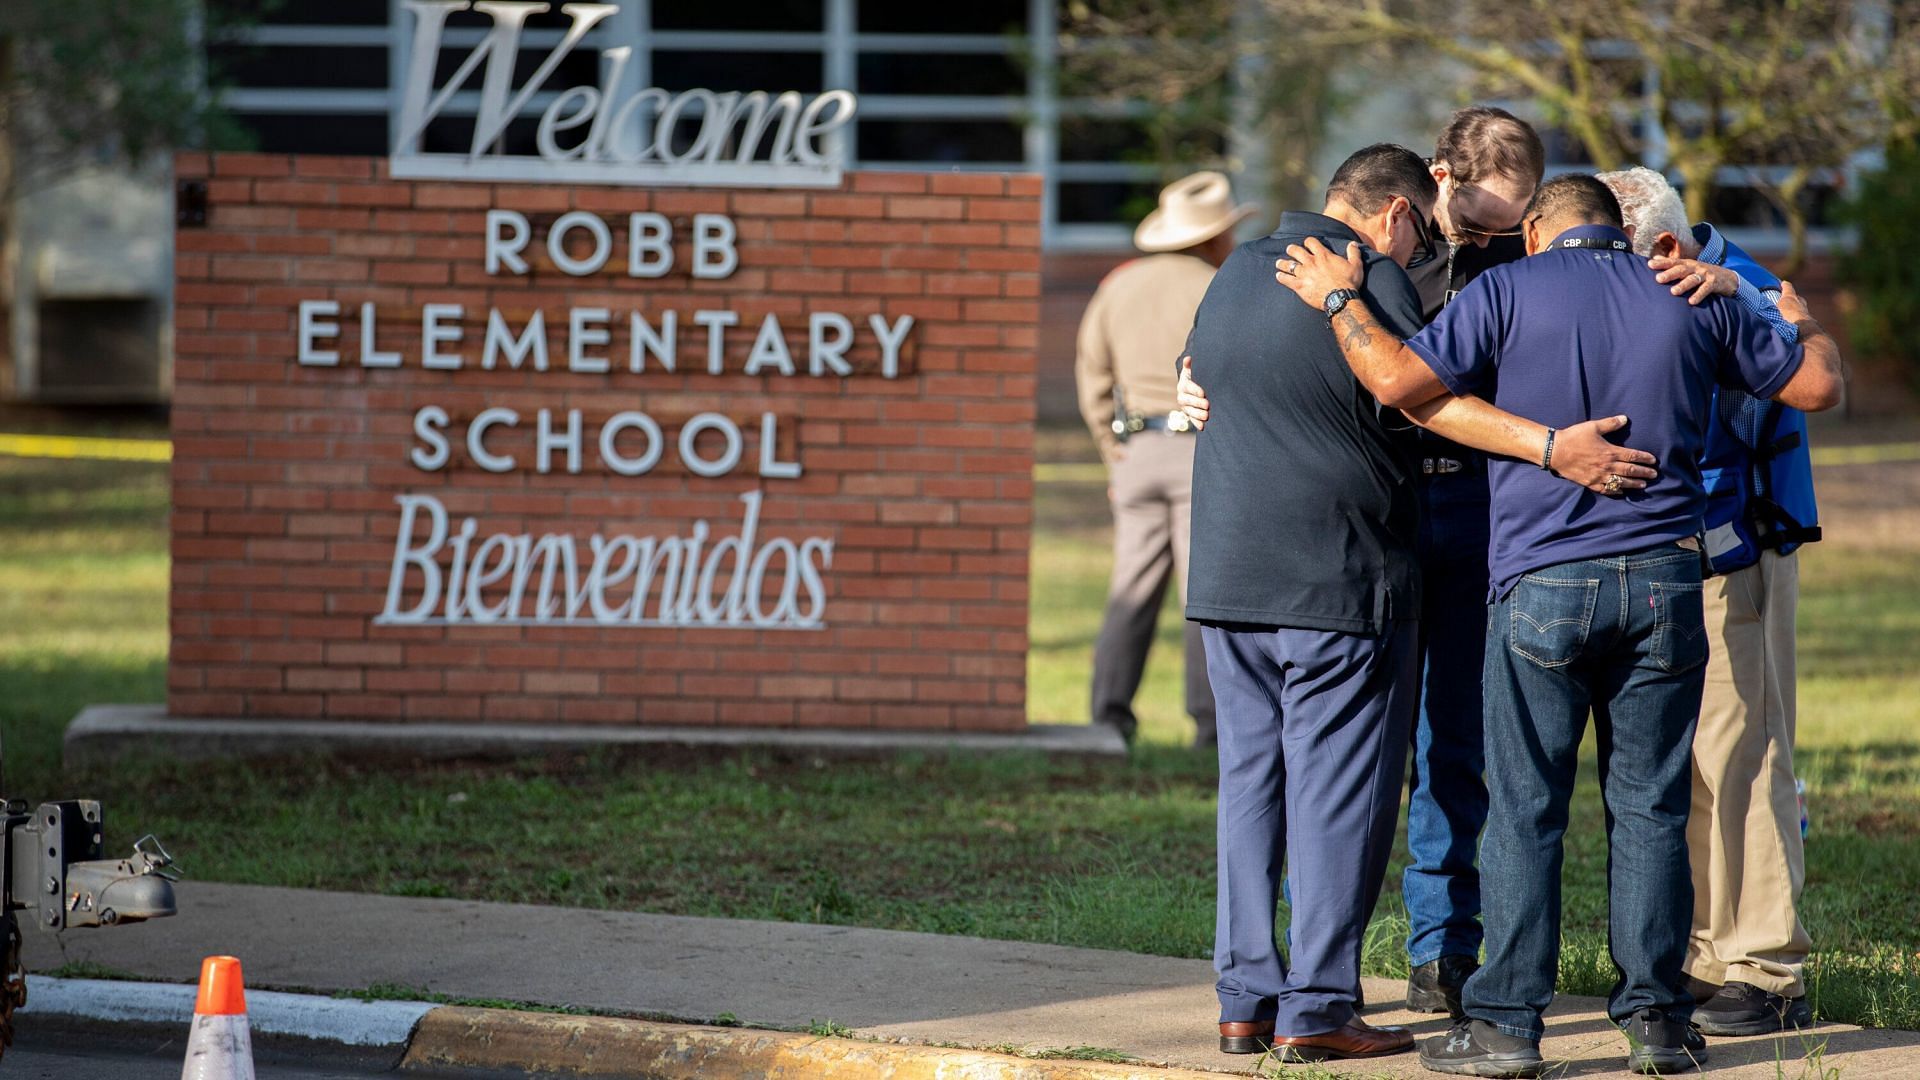 Parents hug outside Robb Elementary School (Image via Ivan Pierre Aguirre for The New York Times)